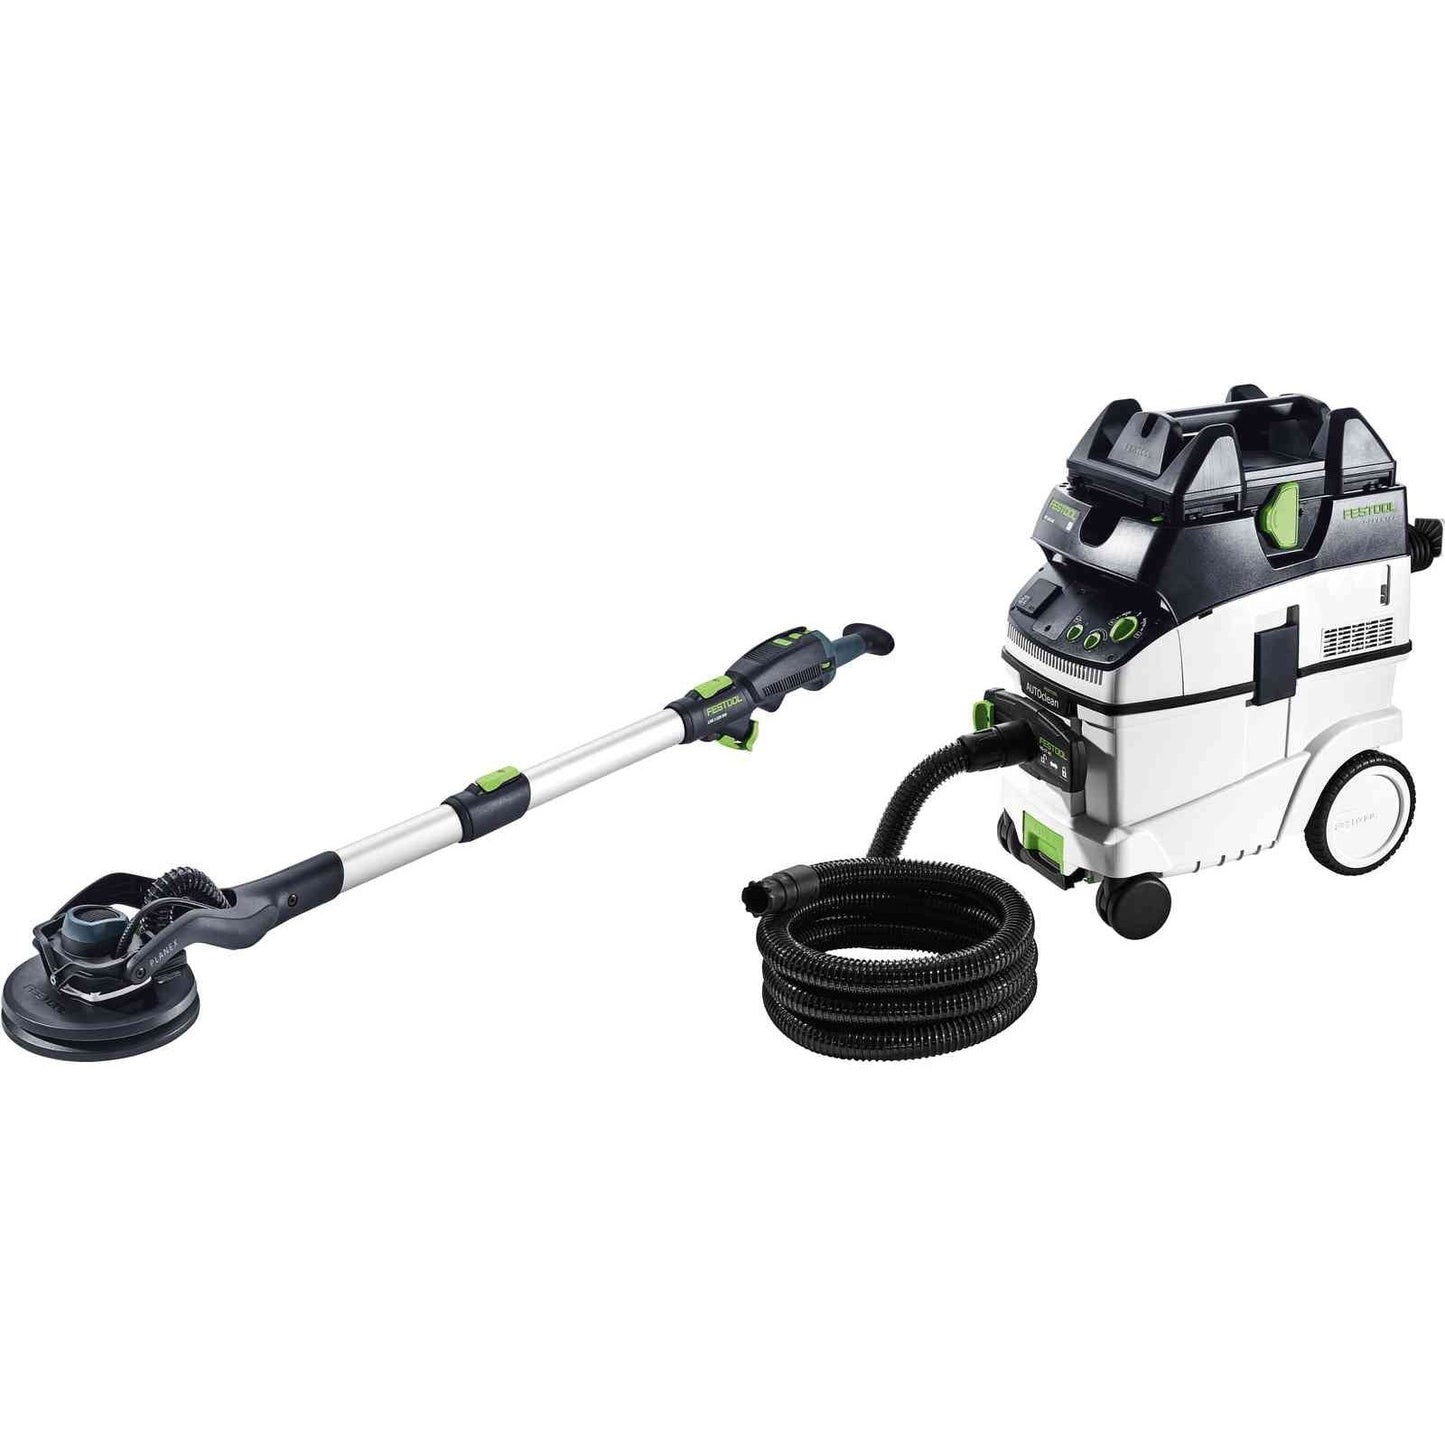 FESTOOL PLANEX, LHS 2 225 LONG-REACH POLE SANDER SET WITH CT36 DUST EXTRACTOR tool-junction-nz